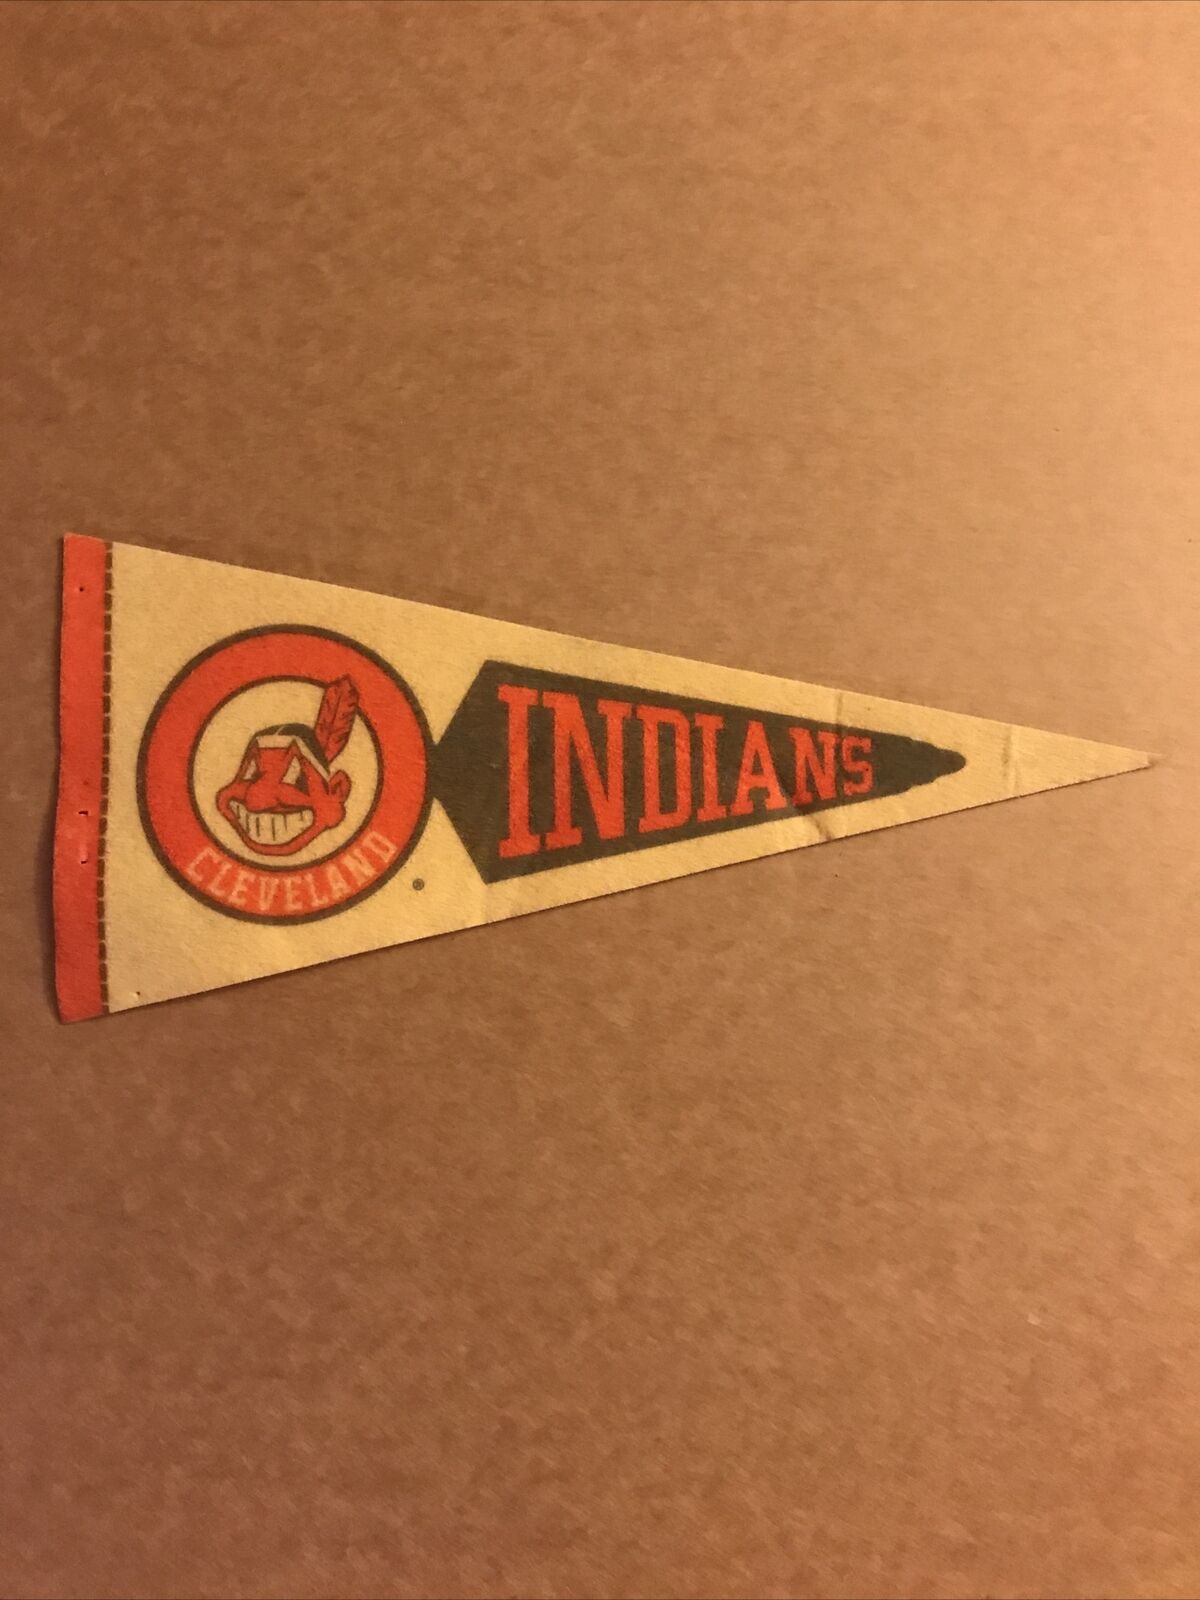 LATE 1970S CLEVELAND INDIANS BASEBALL MINI PENNANT 4 X 9 inch